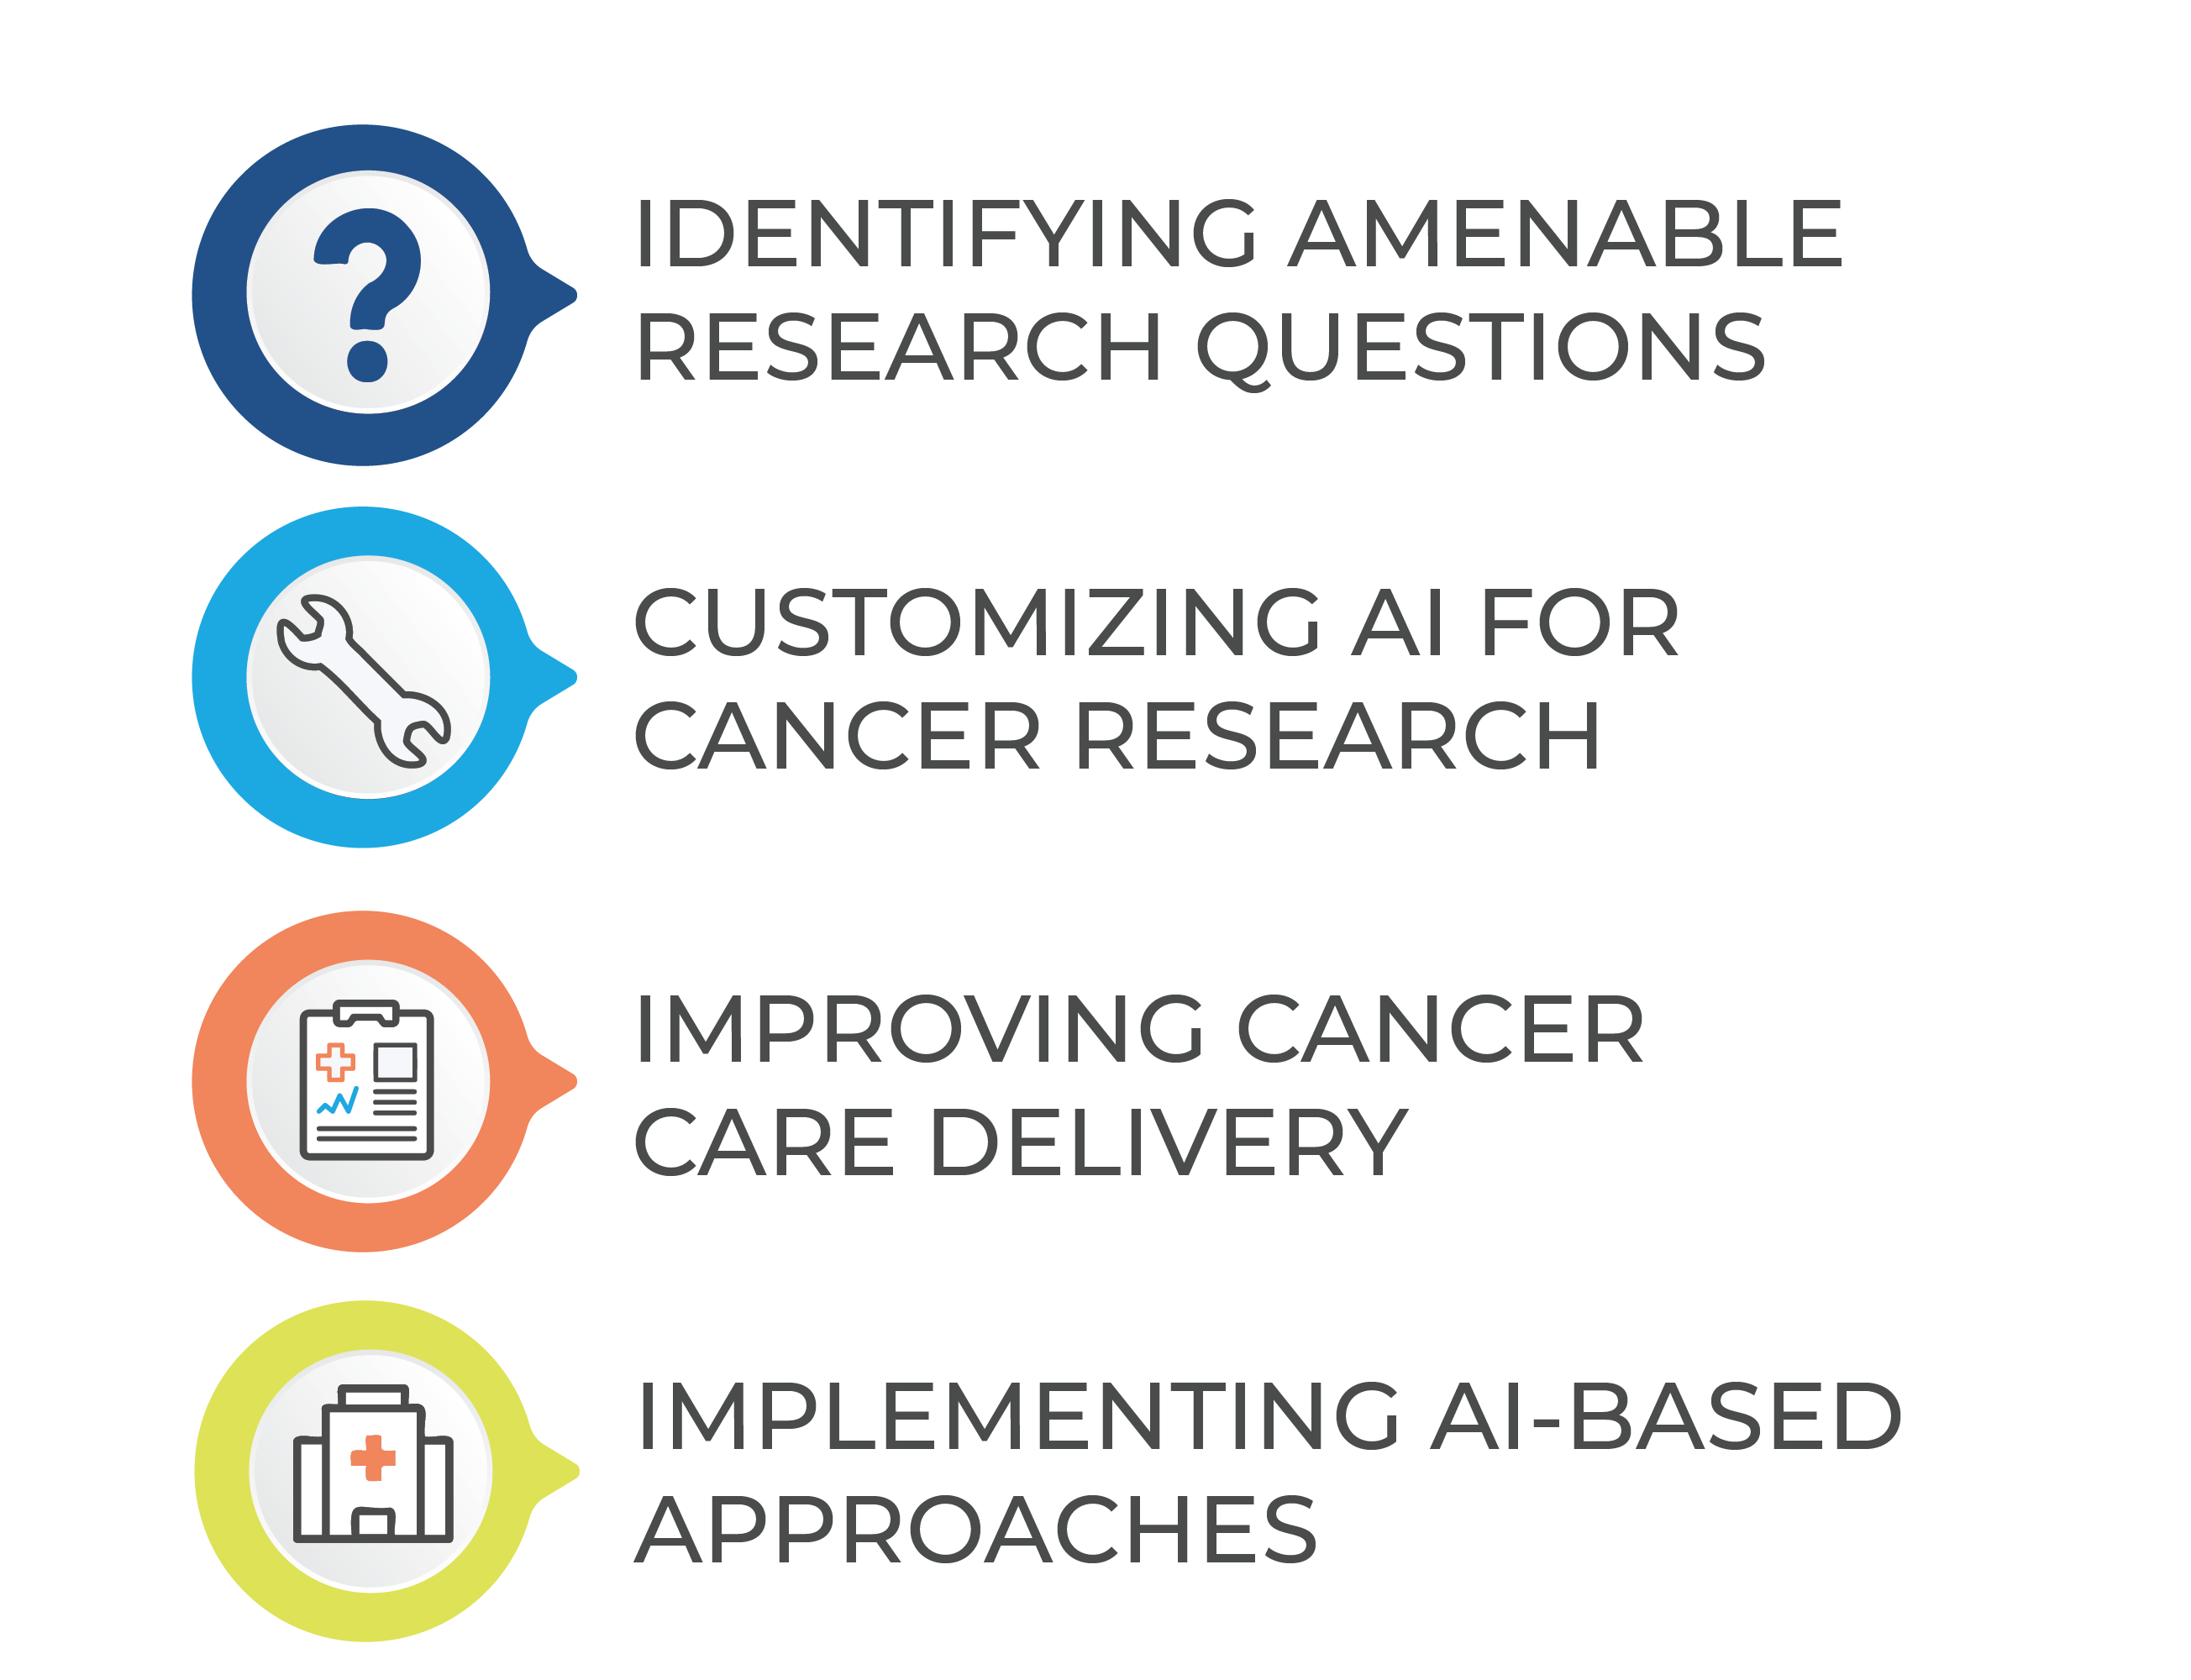 Depiction of the four priority areas: IDENTIFYING AMENABLE RESEARCH QUESTIONS CUSTOMIZING AI FOR CANCER RESEARCH IMPROVING CANCER CARE DELIVERY IMPLEMENTING AI-BASED APPROACHES